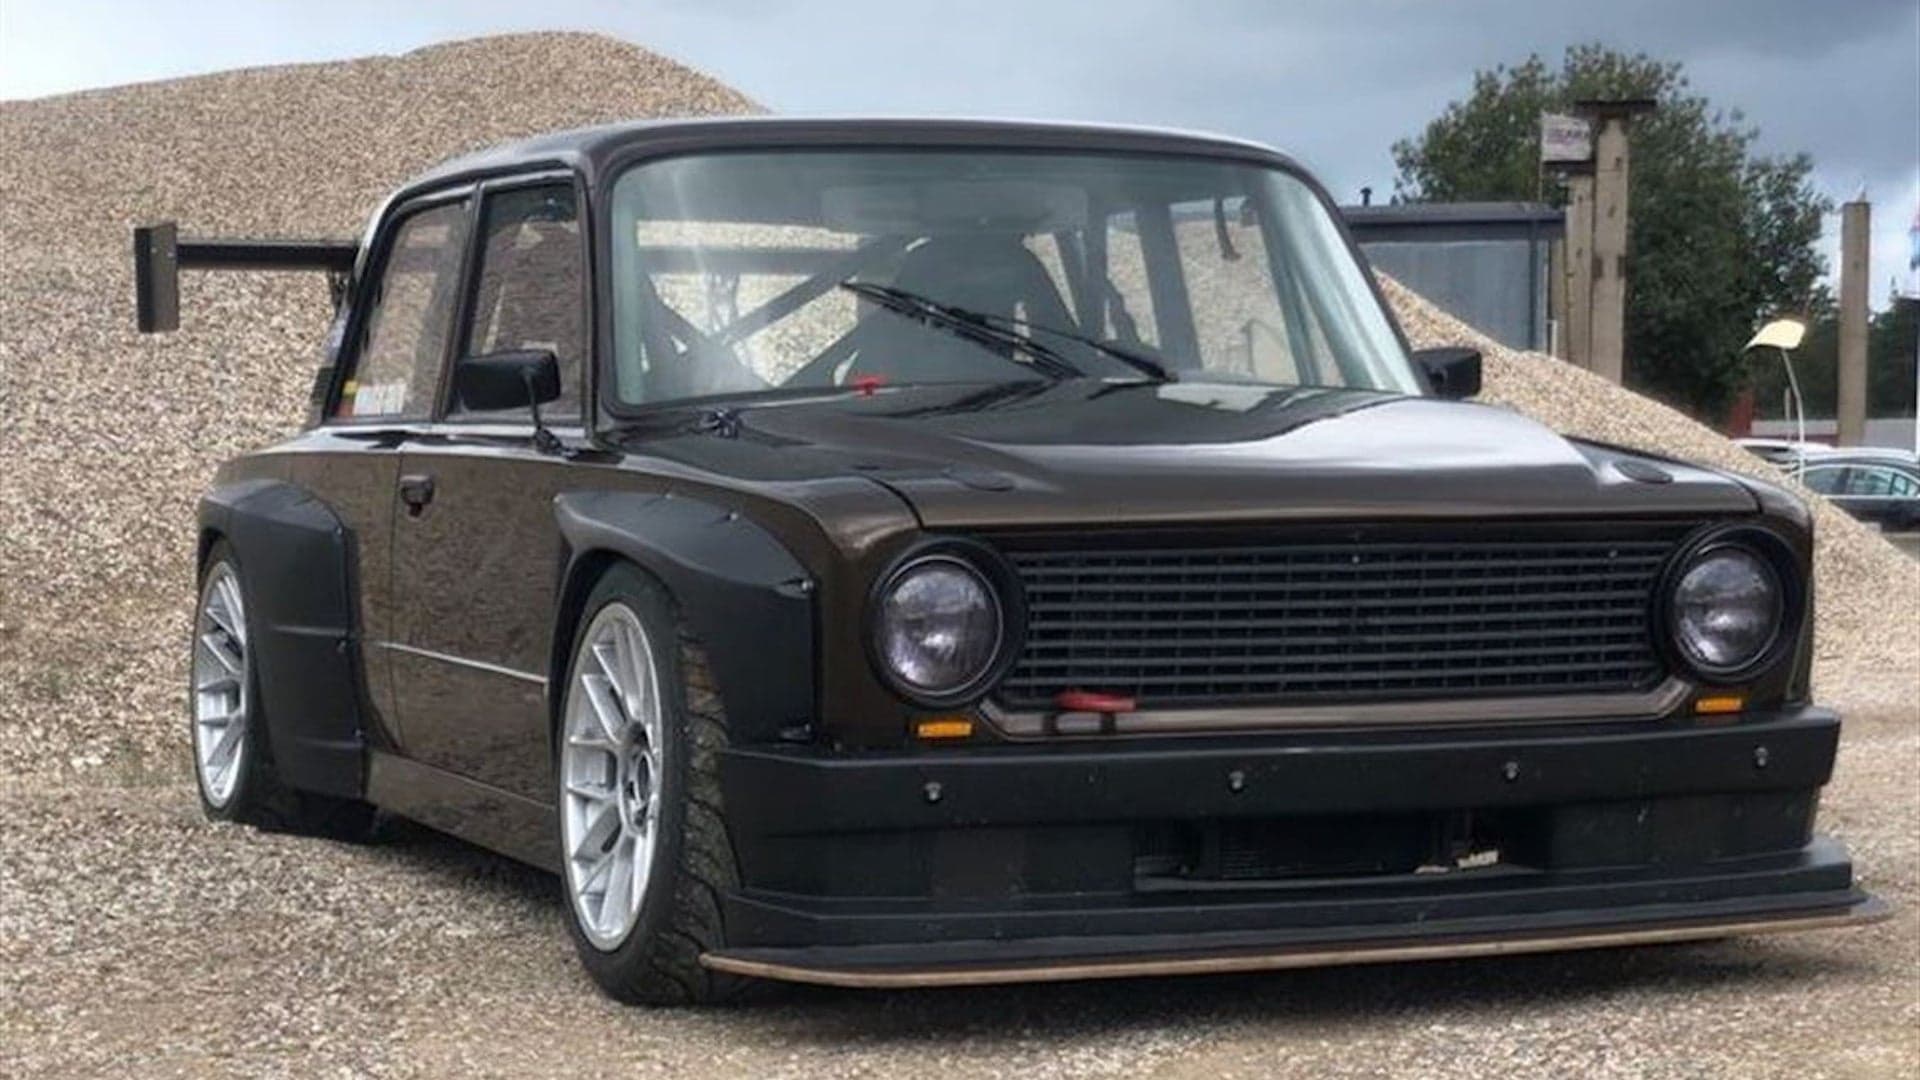 $24,000 Will Get You This Adorable Lada 2021 Race Car With a Lancia Integrale Engine